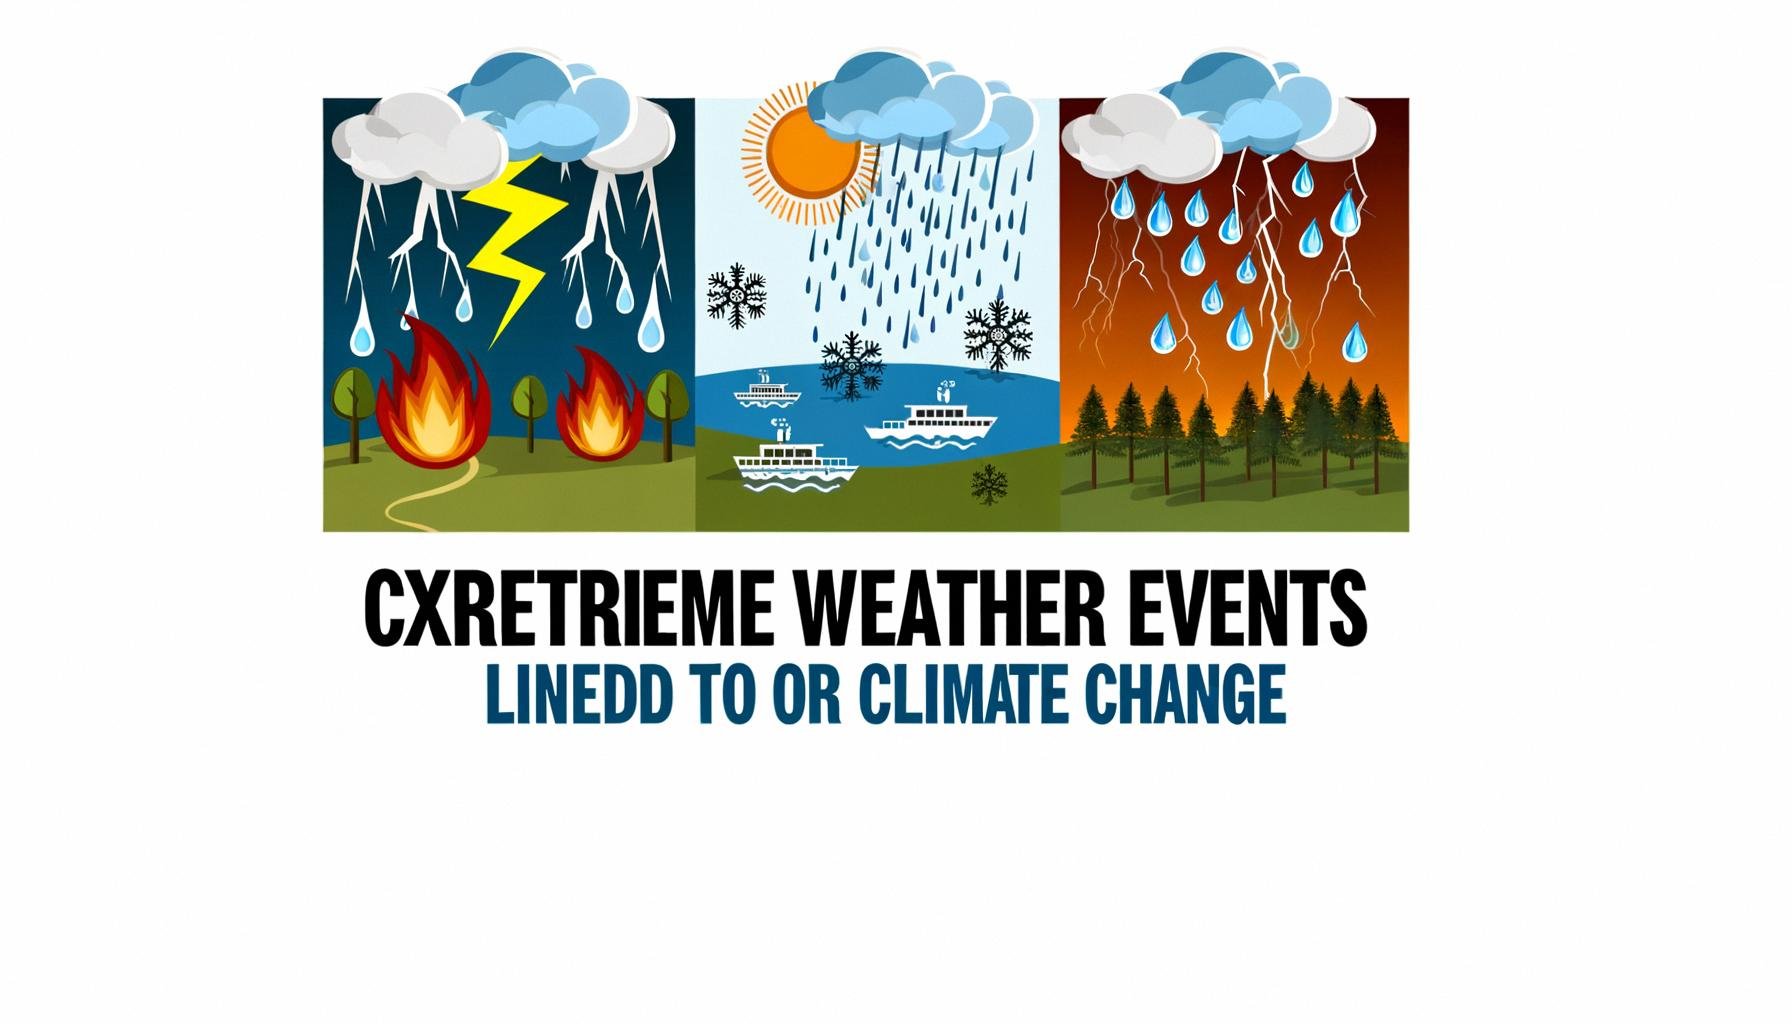 Extreme weather events linked to climate change